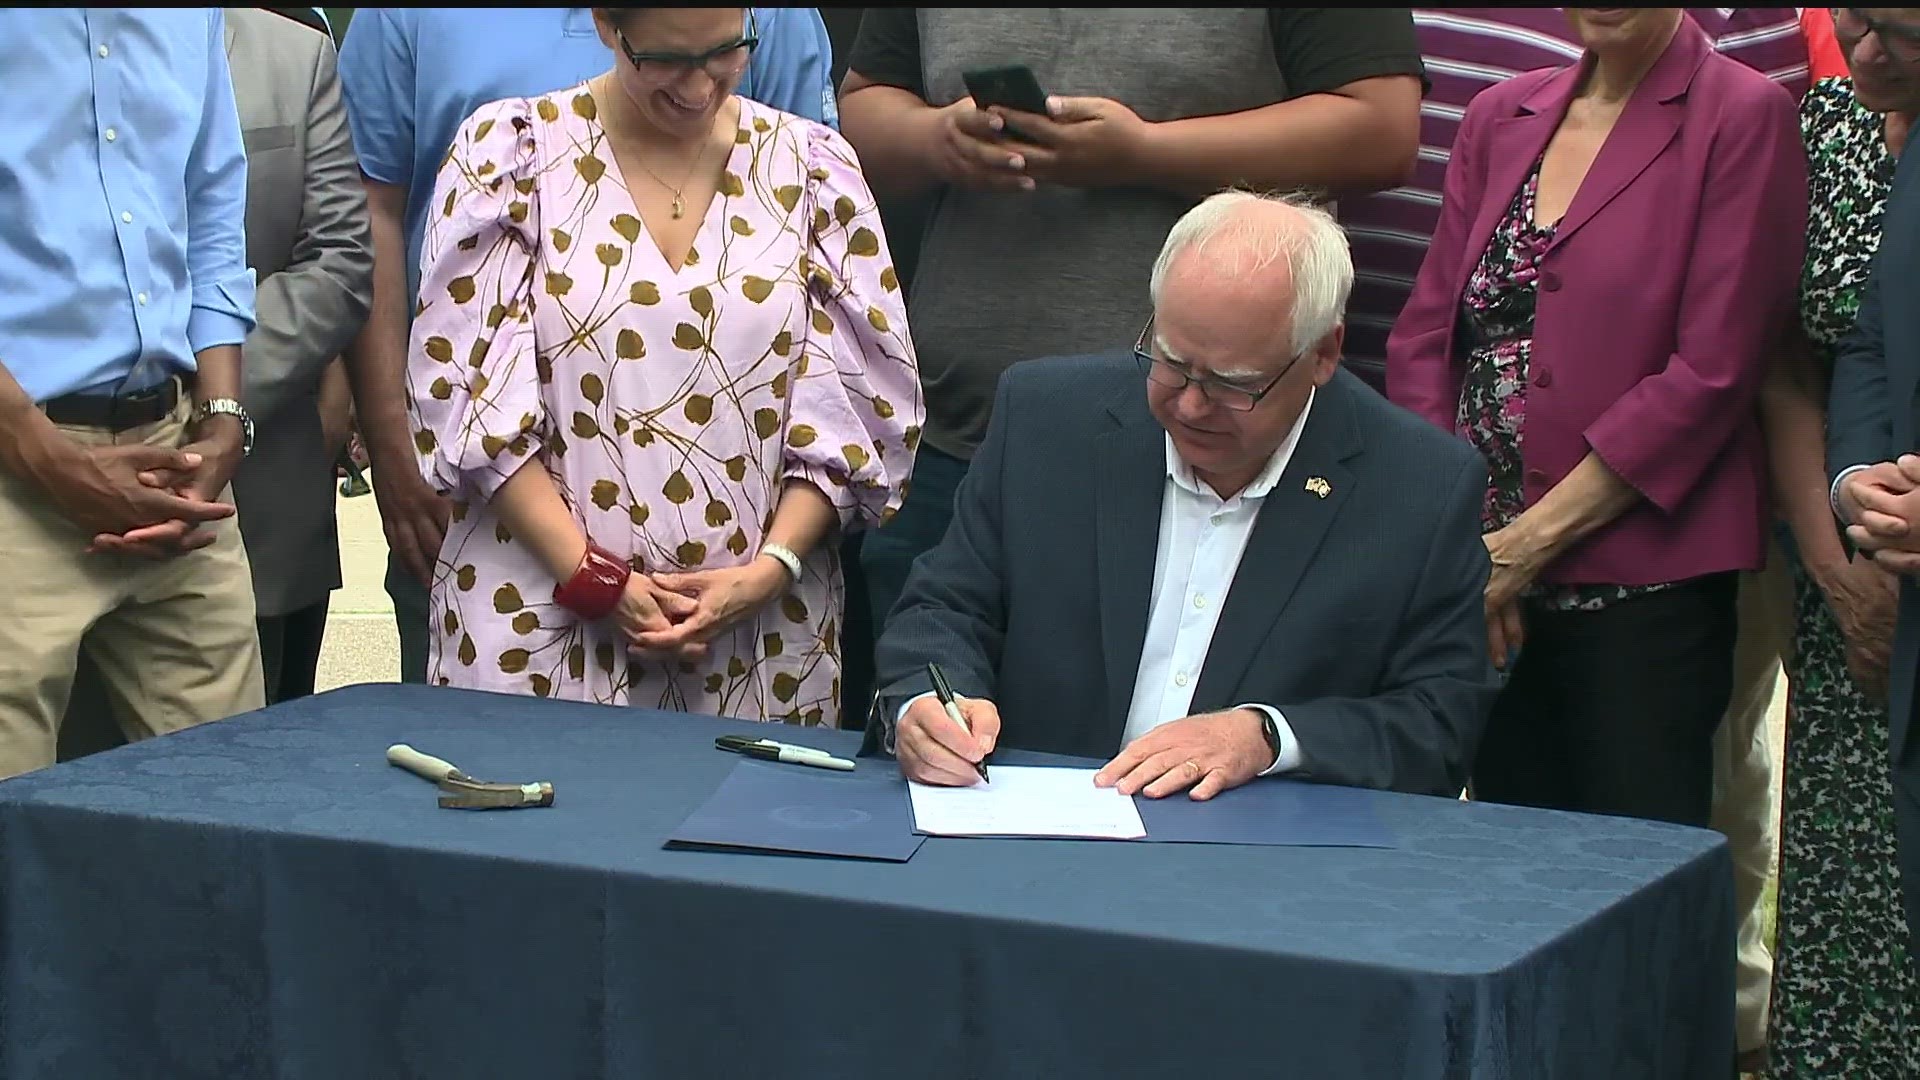 “This is truly the golden age of infrastructure construction across the state," Governor Walz said.